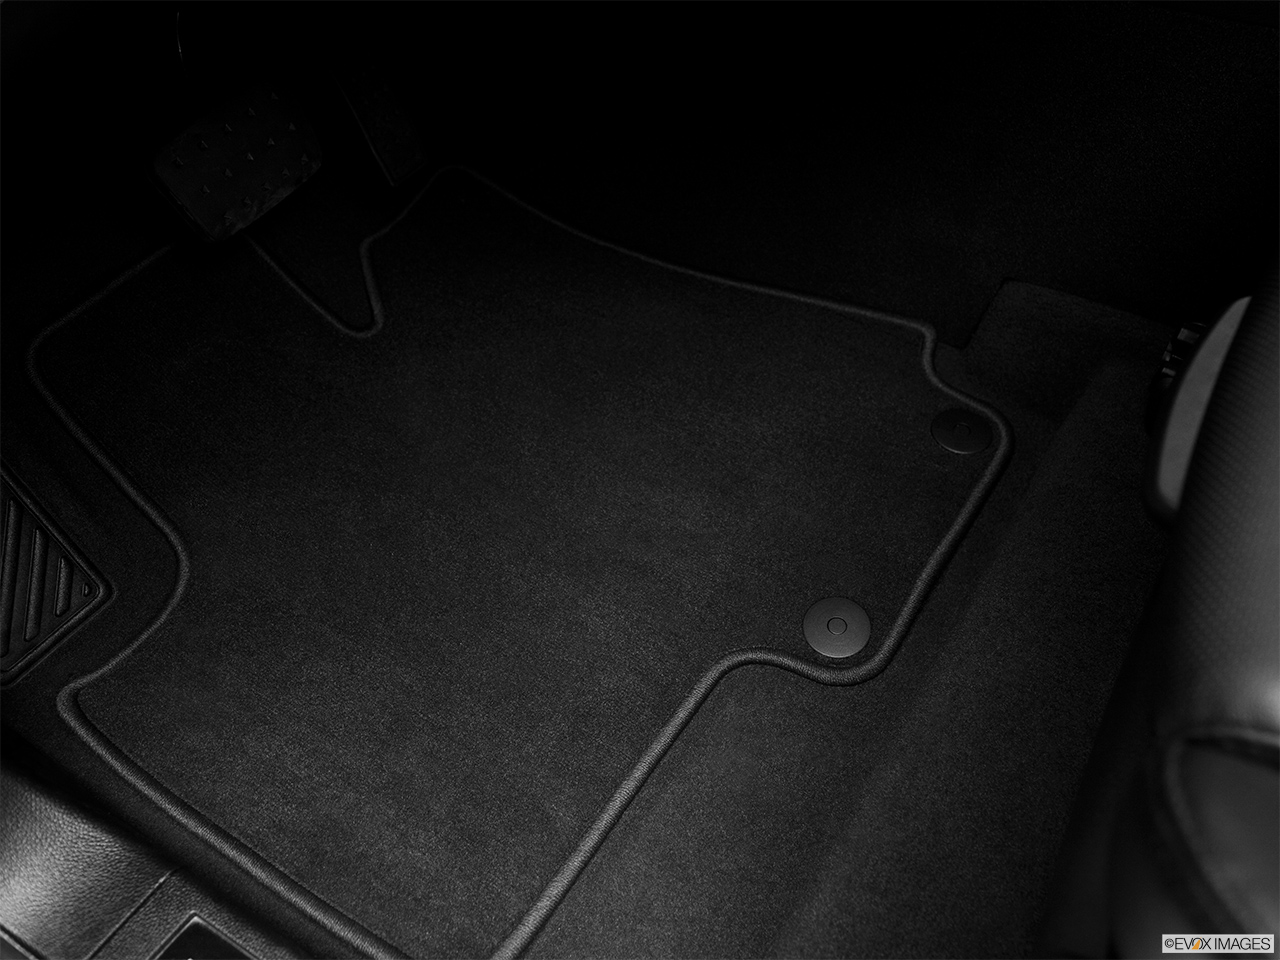 2011 Saab 9-4X 3.0i Driver's floor mat and pedals. Mid-seat level from outside looking in. 